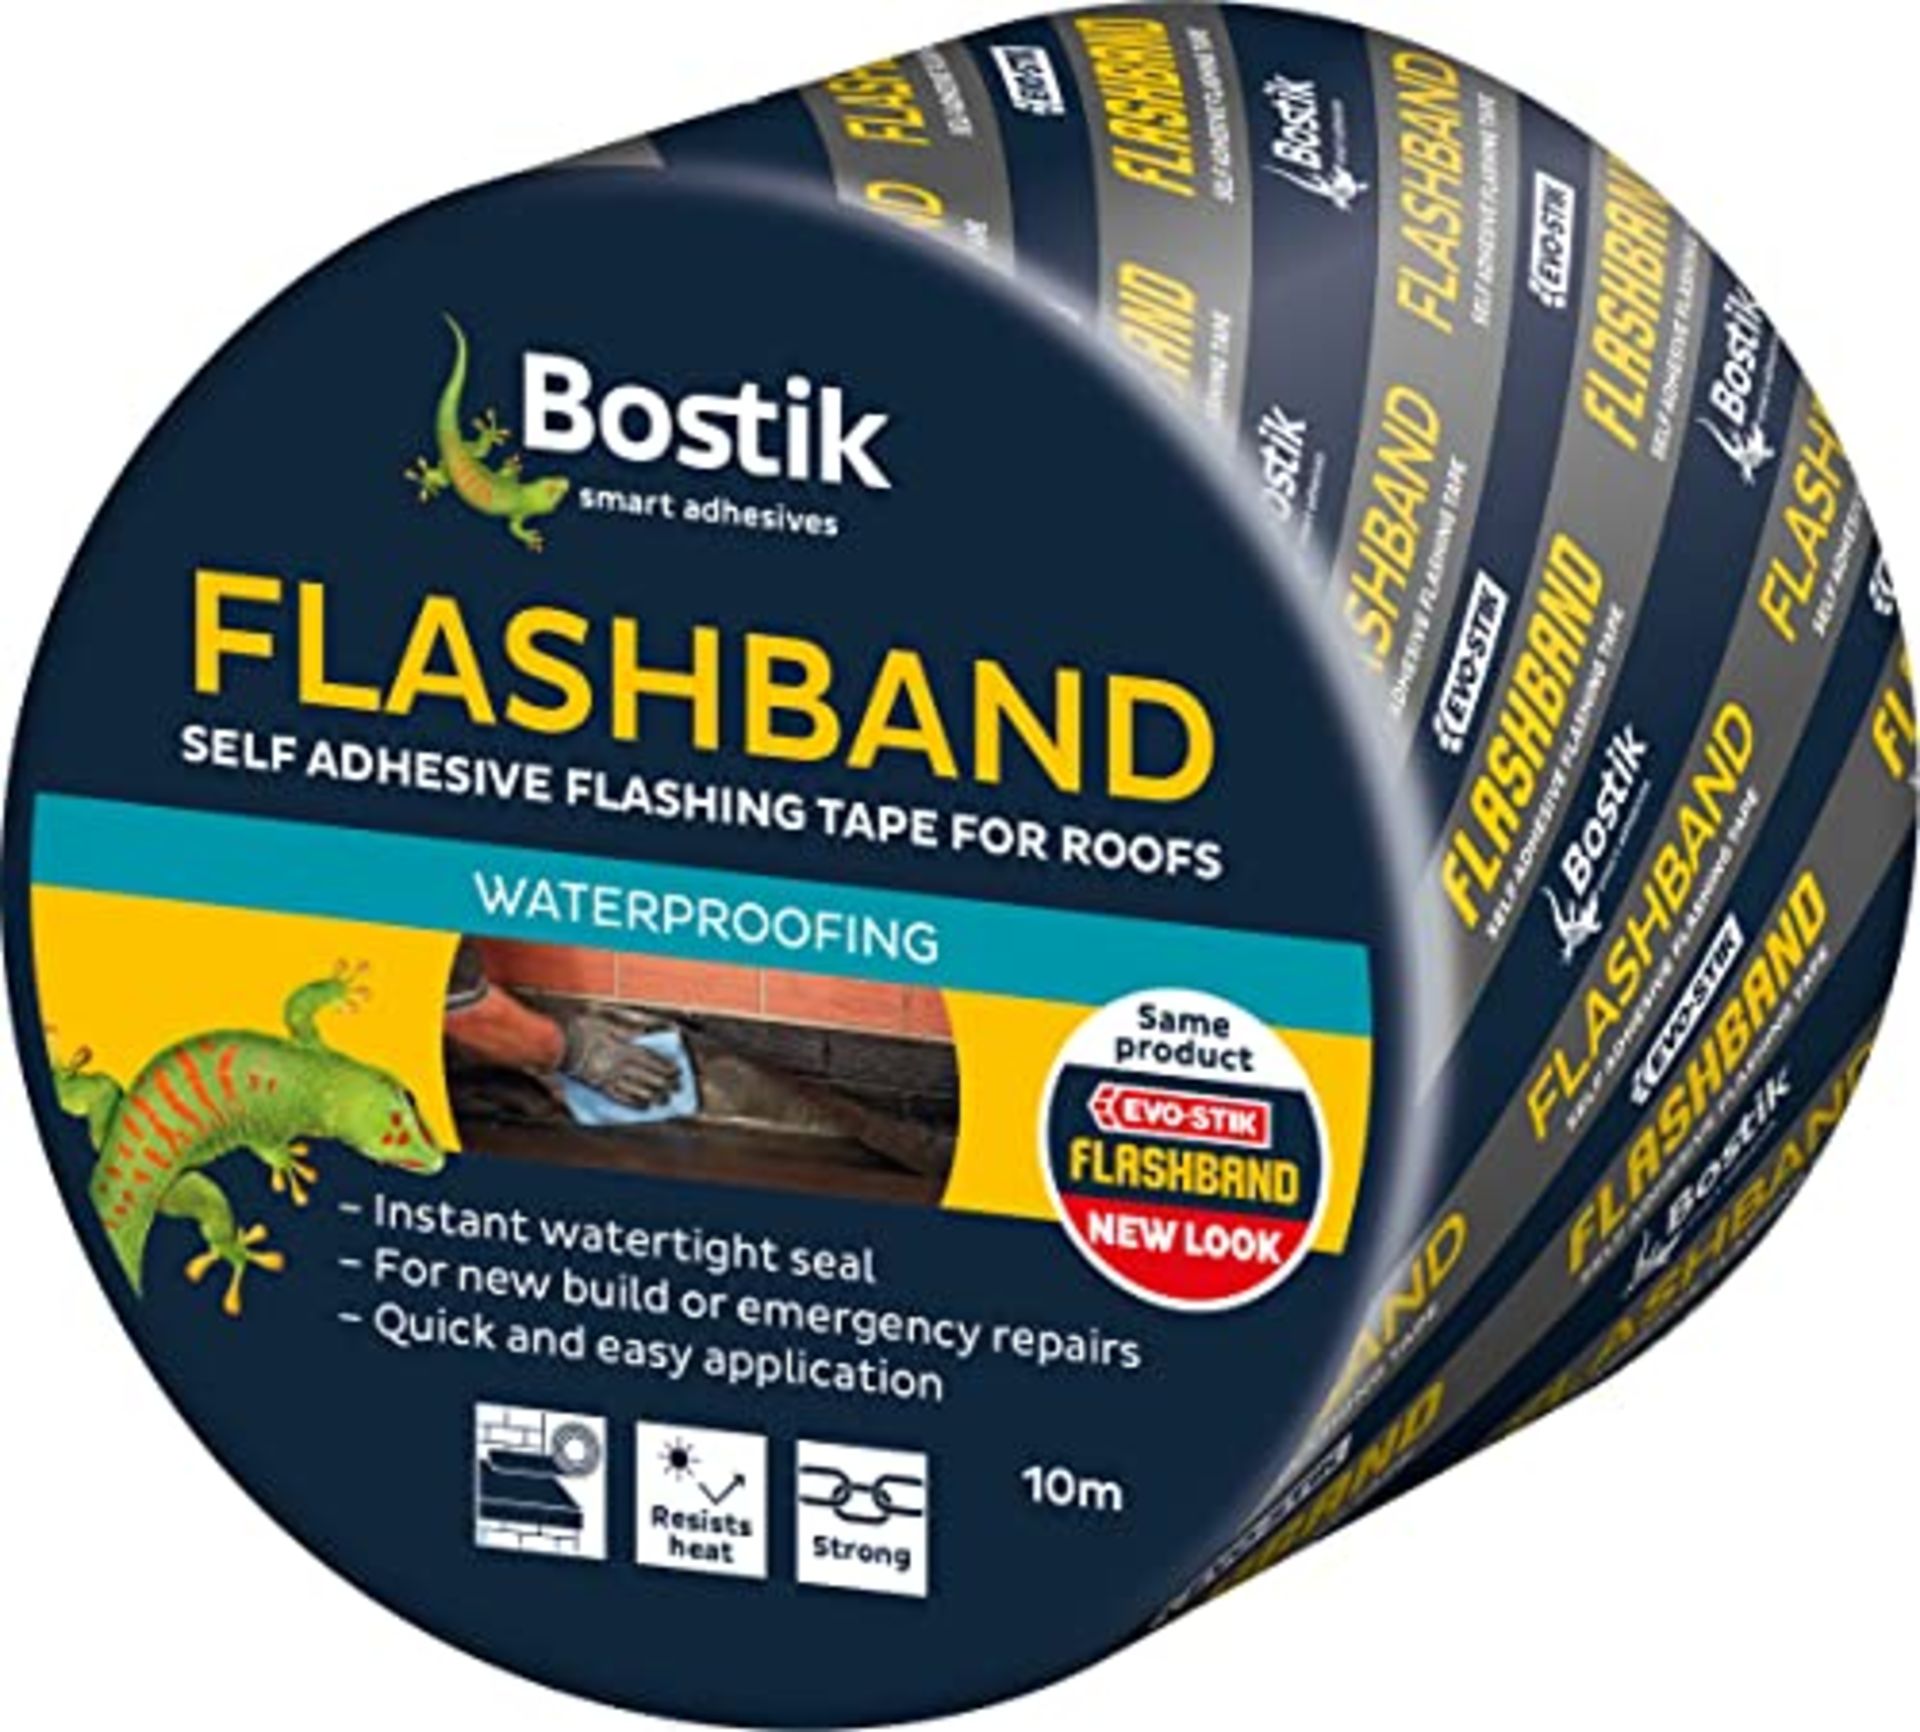 Bostik Flashband Self Adhesive Flashing Tape for Roofs, Provides an Instant Watertight